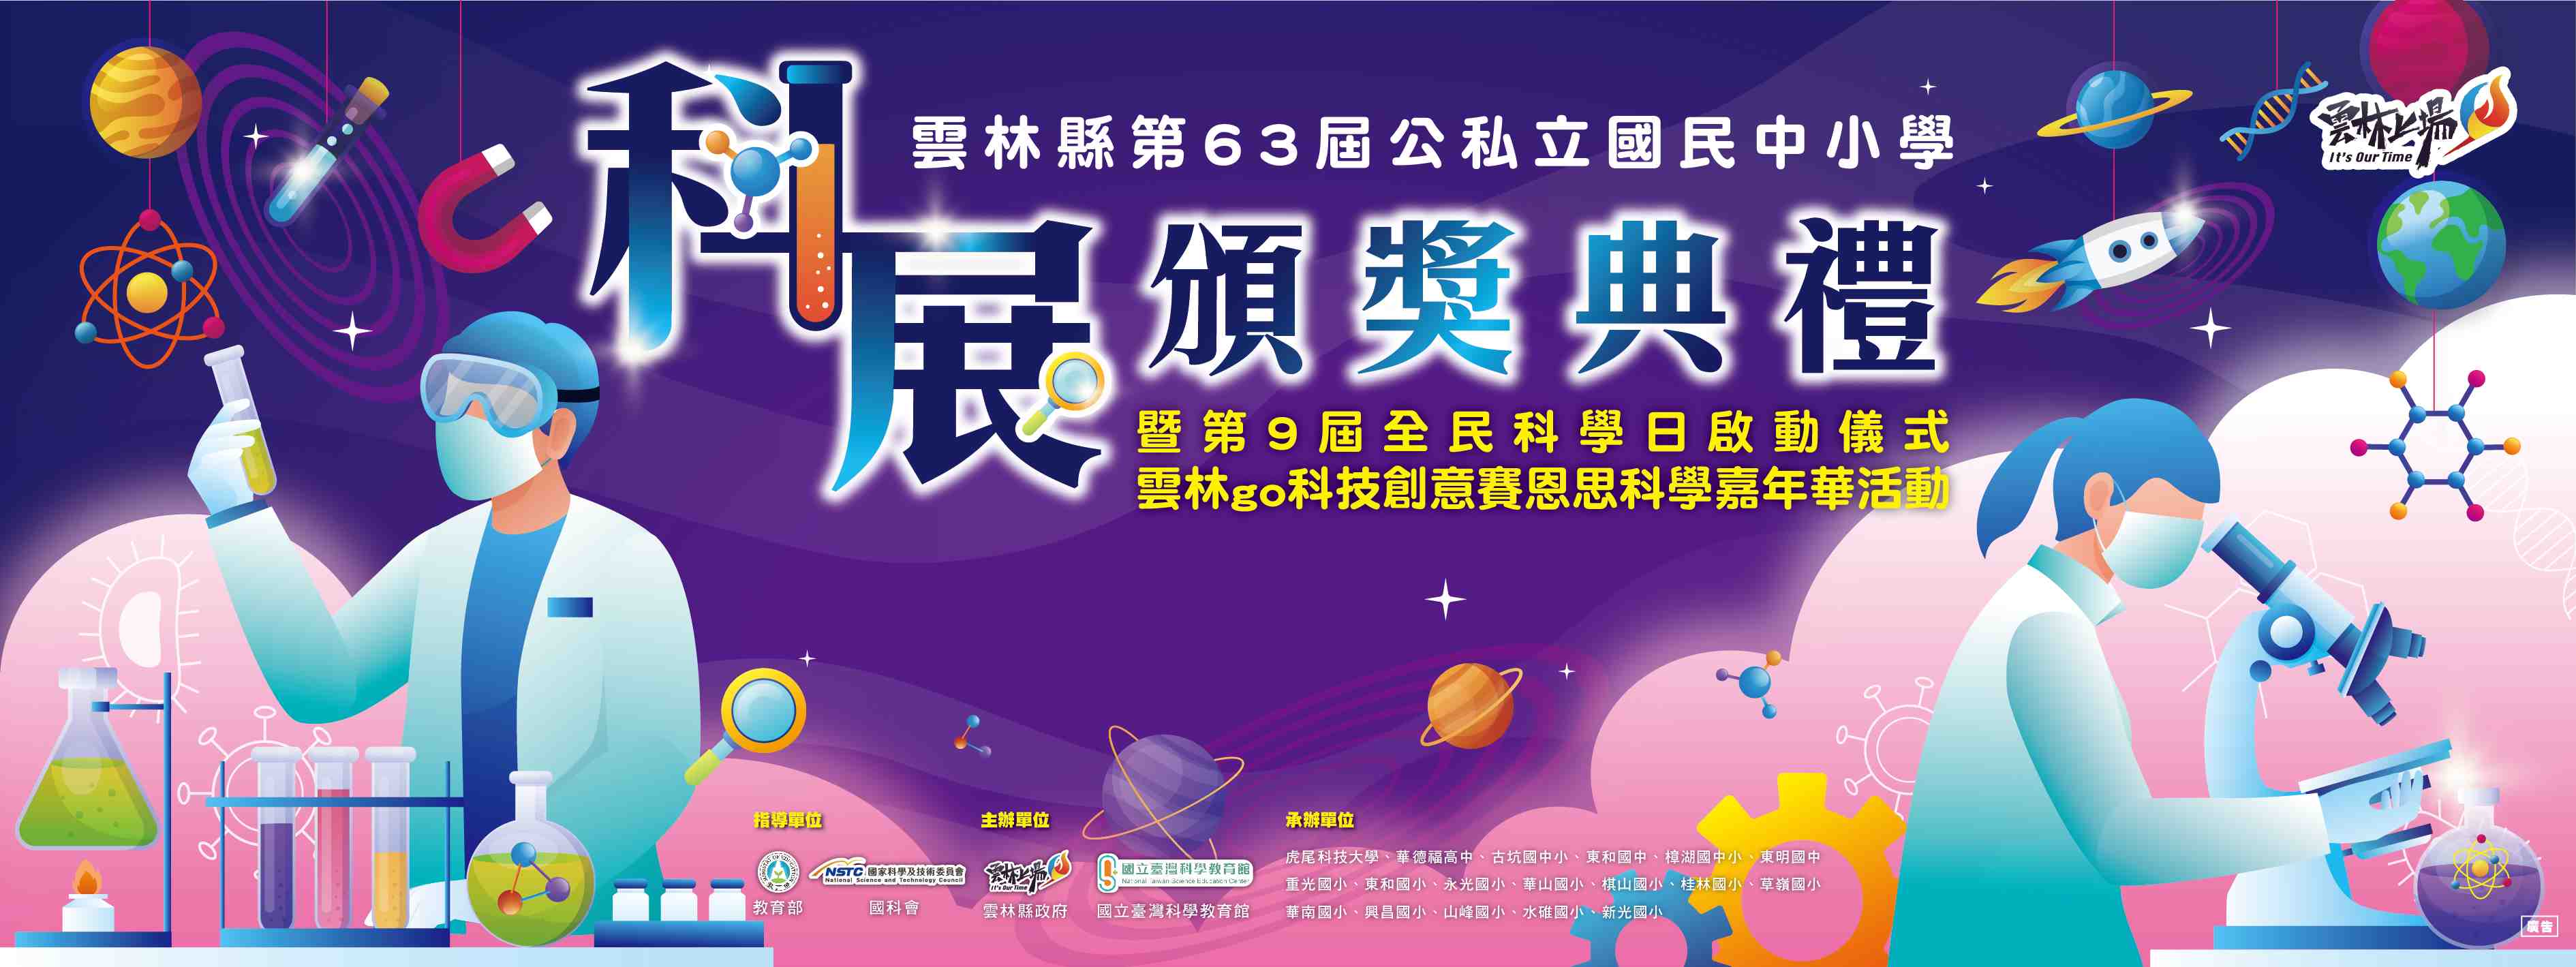 The 9th Yunlin County Science Day Promotional Graphics or Posters